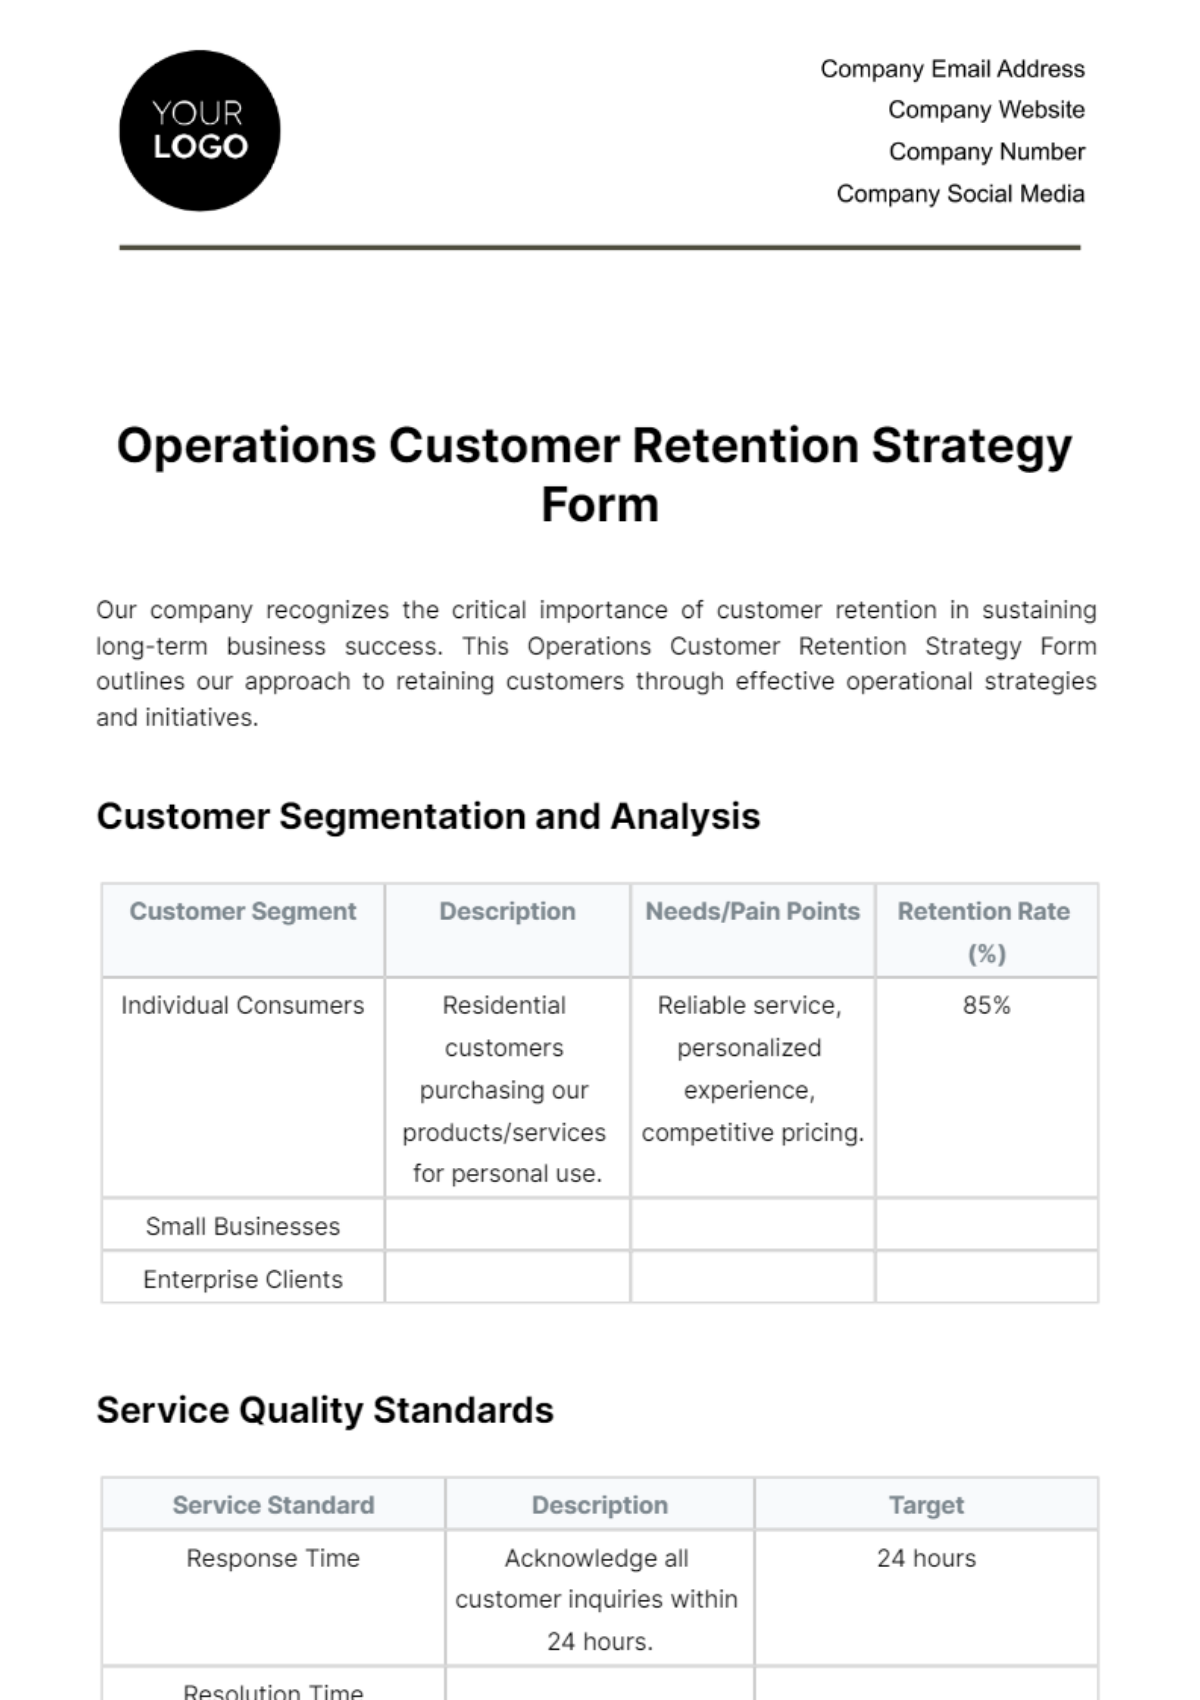 Free Operations Customer Retention Strategy Form Template